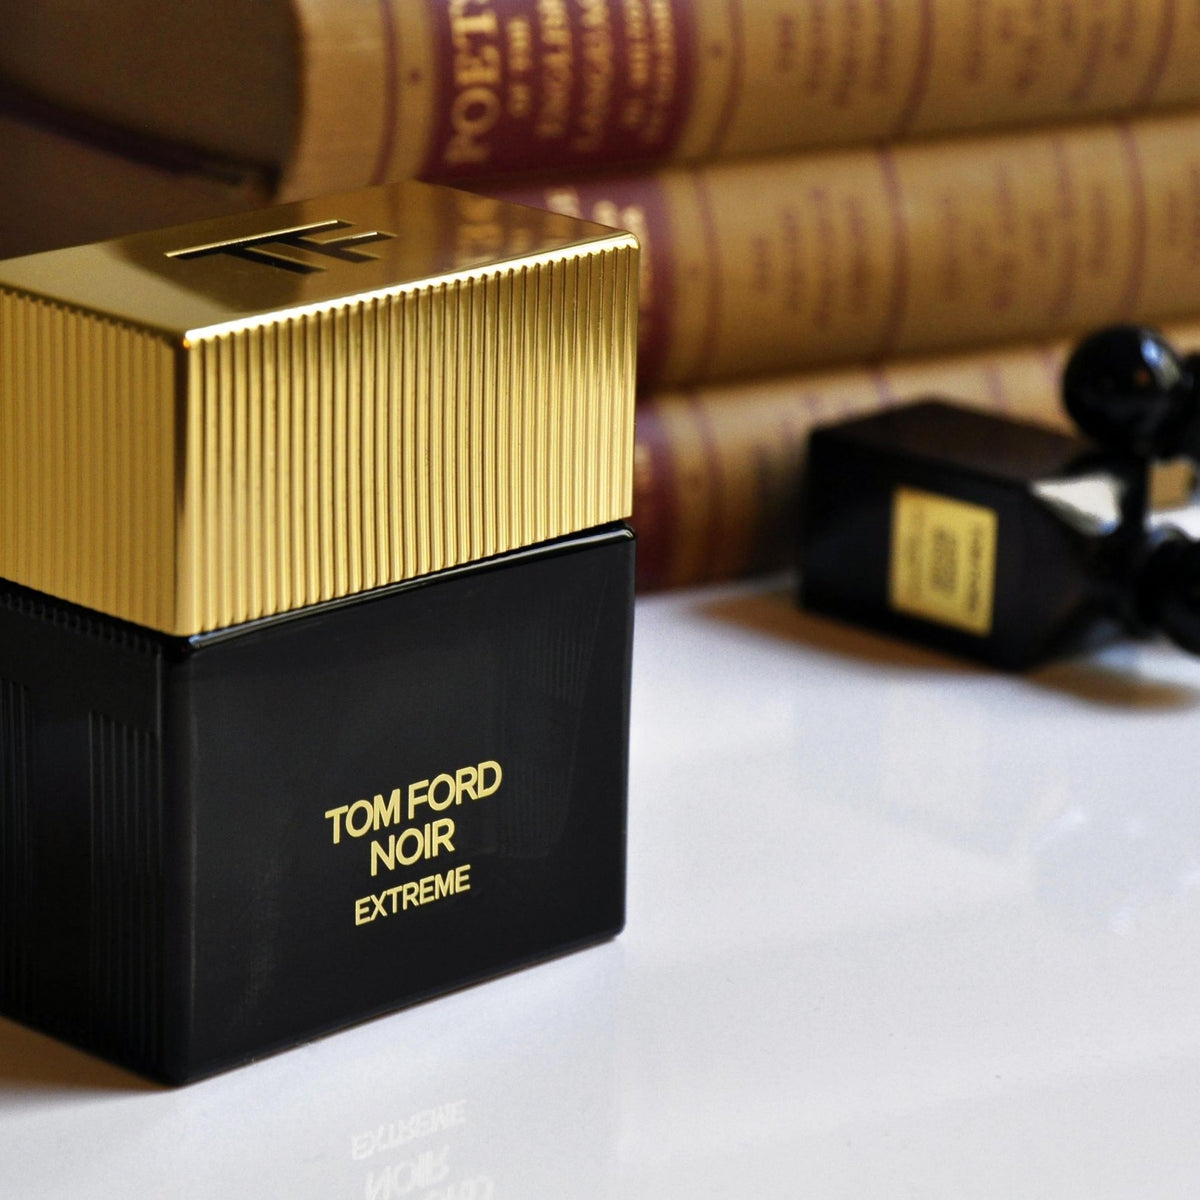 TOM FORD Noir vs. Noir Extreme: What's the Difference?